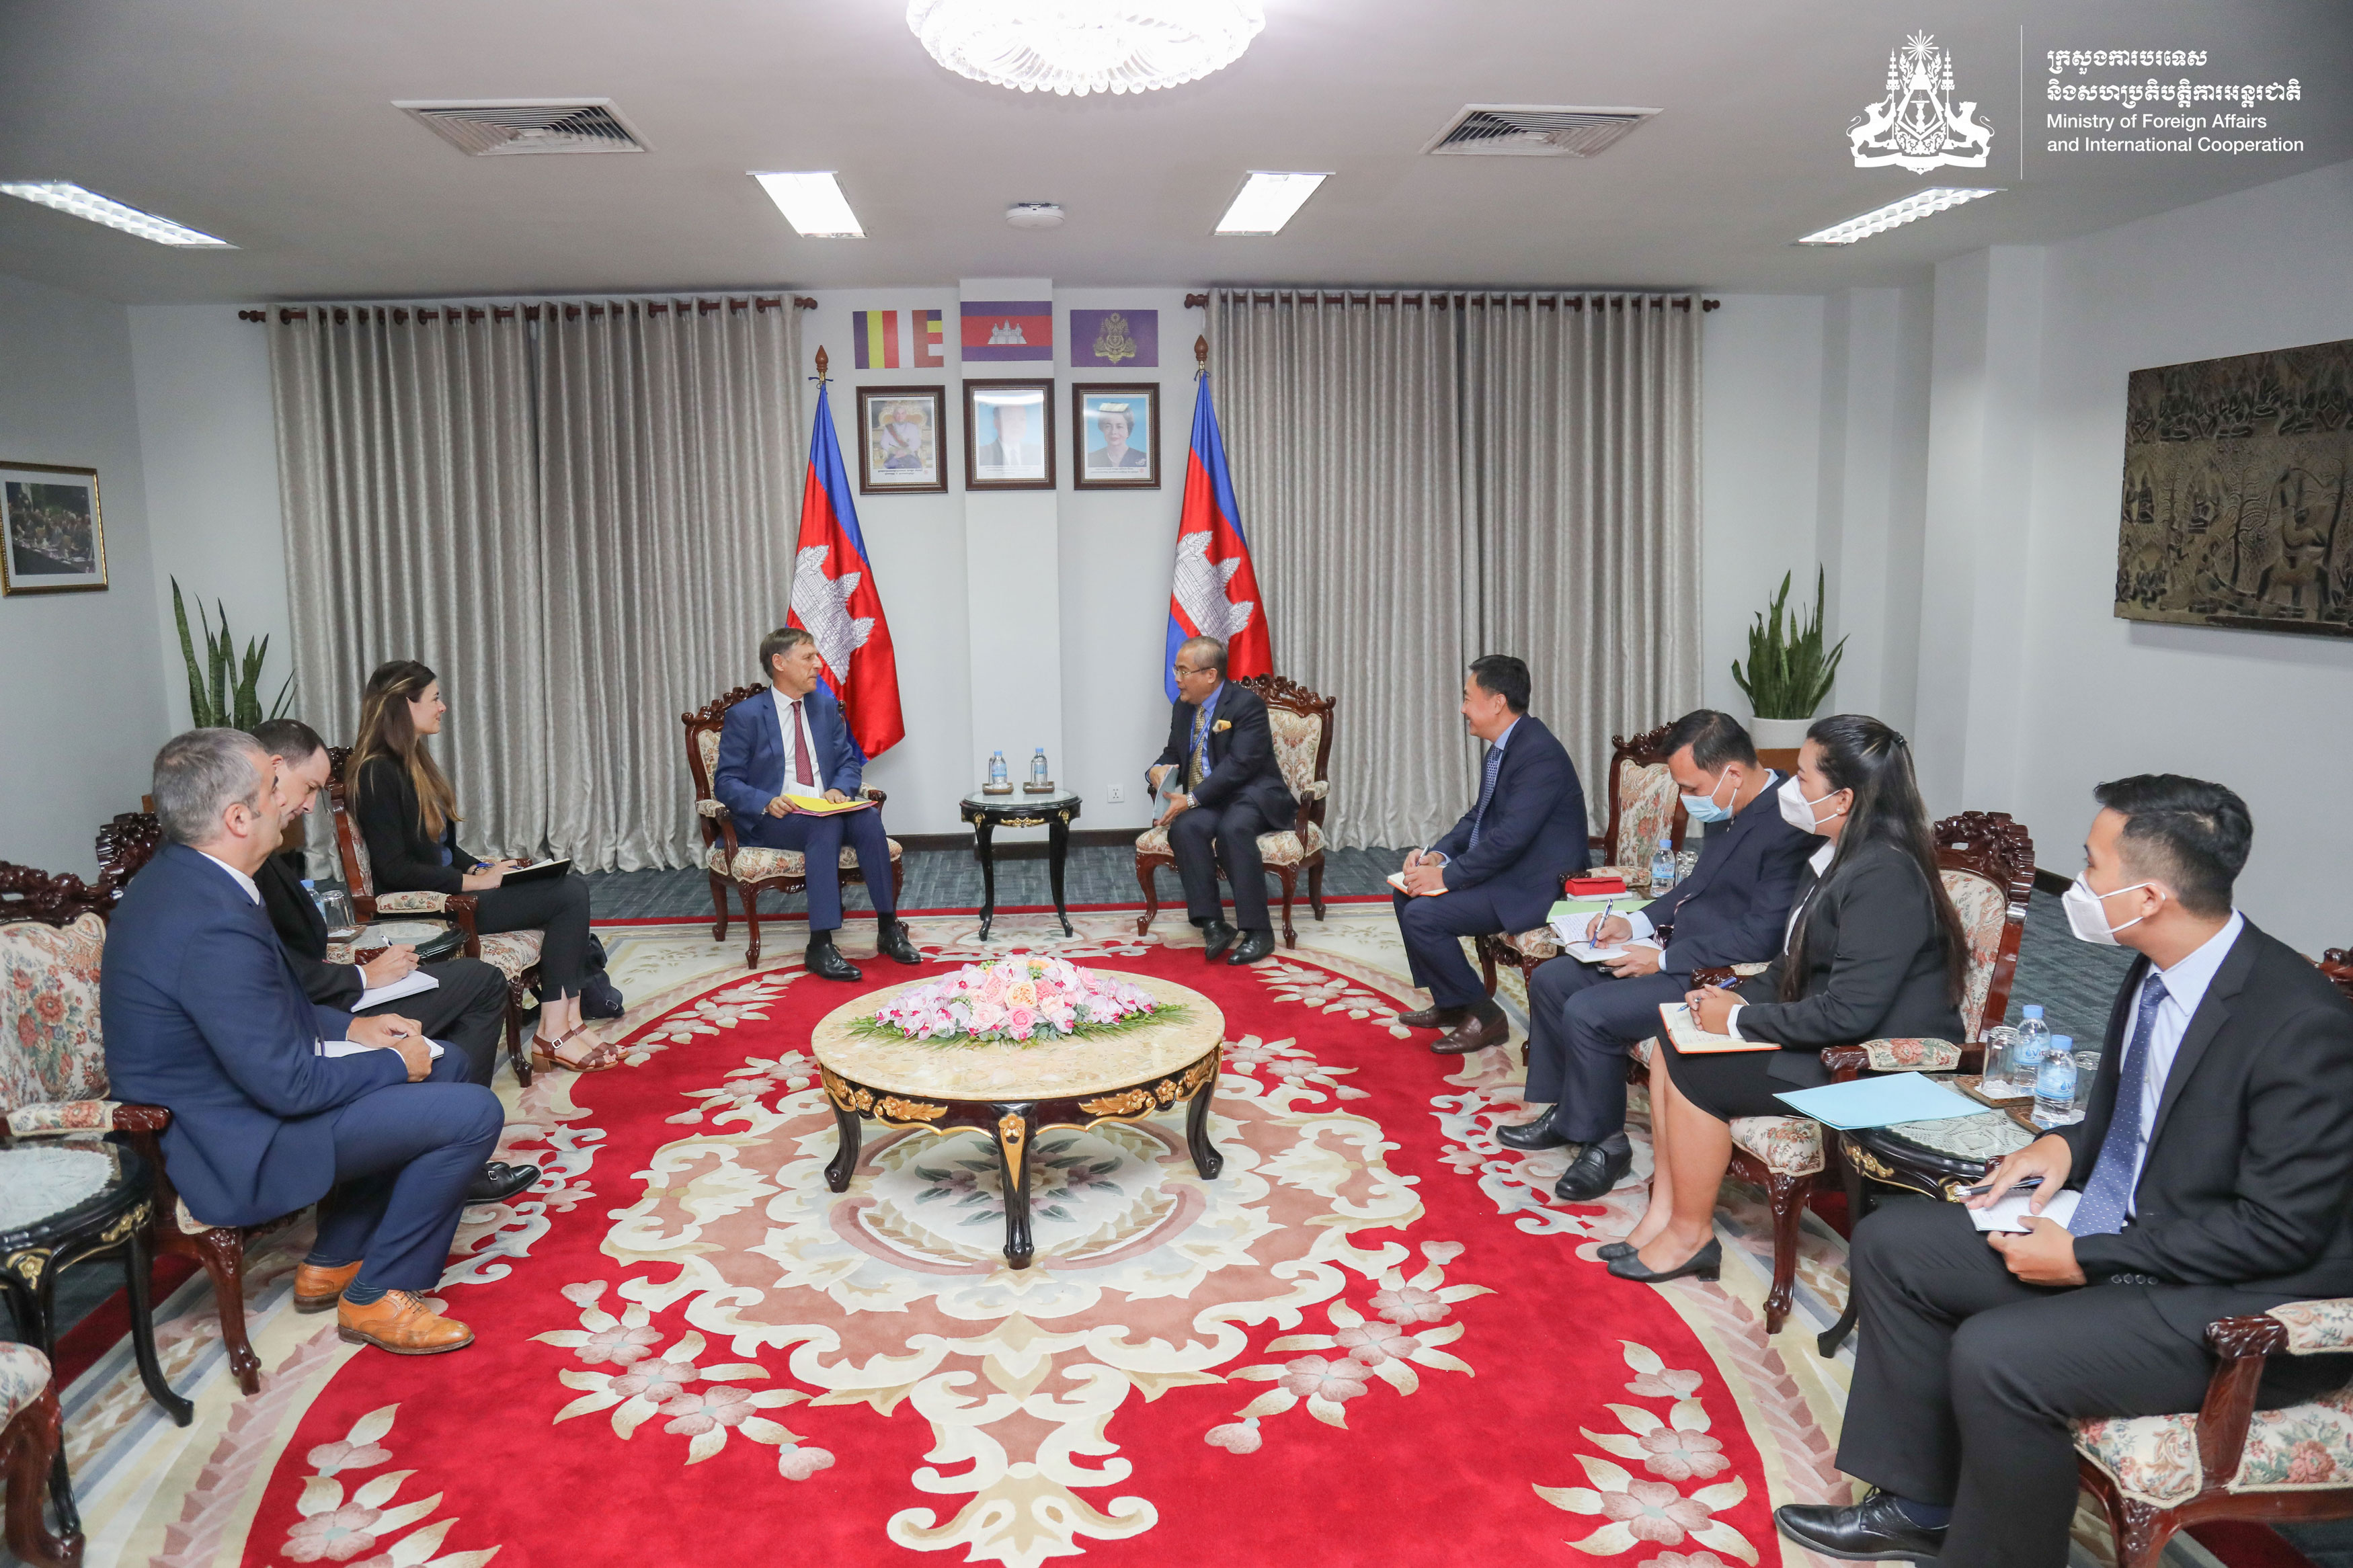 Meeting with H.E. Mr. Jacques PELLET, Ambassador of France to Cambodia ...